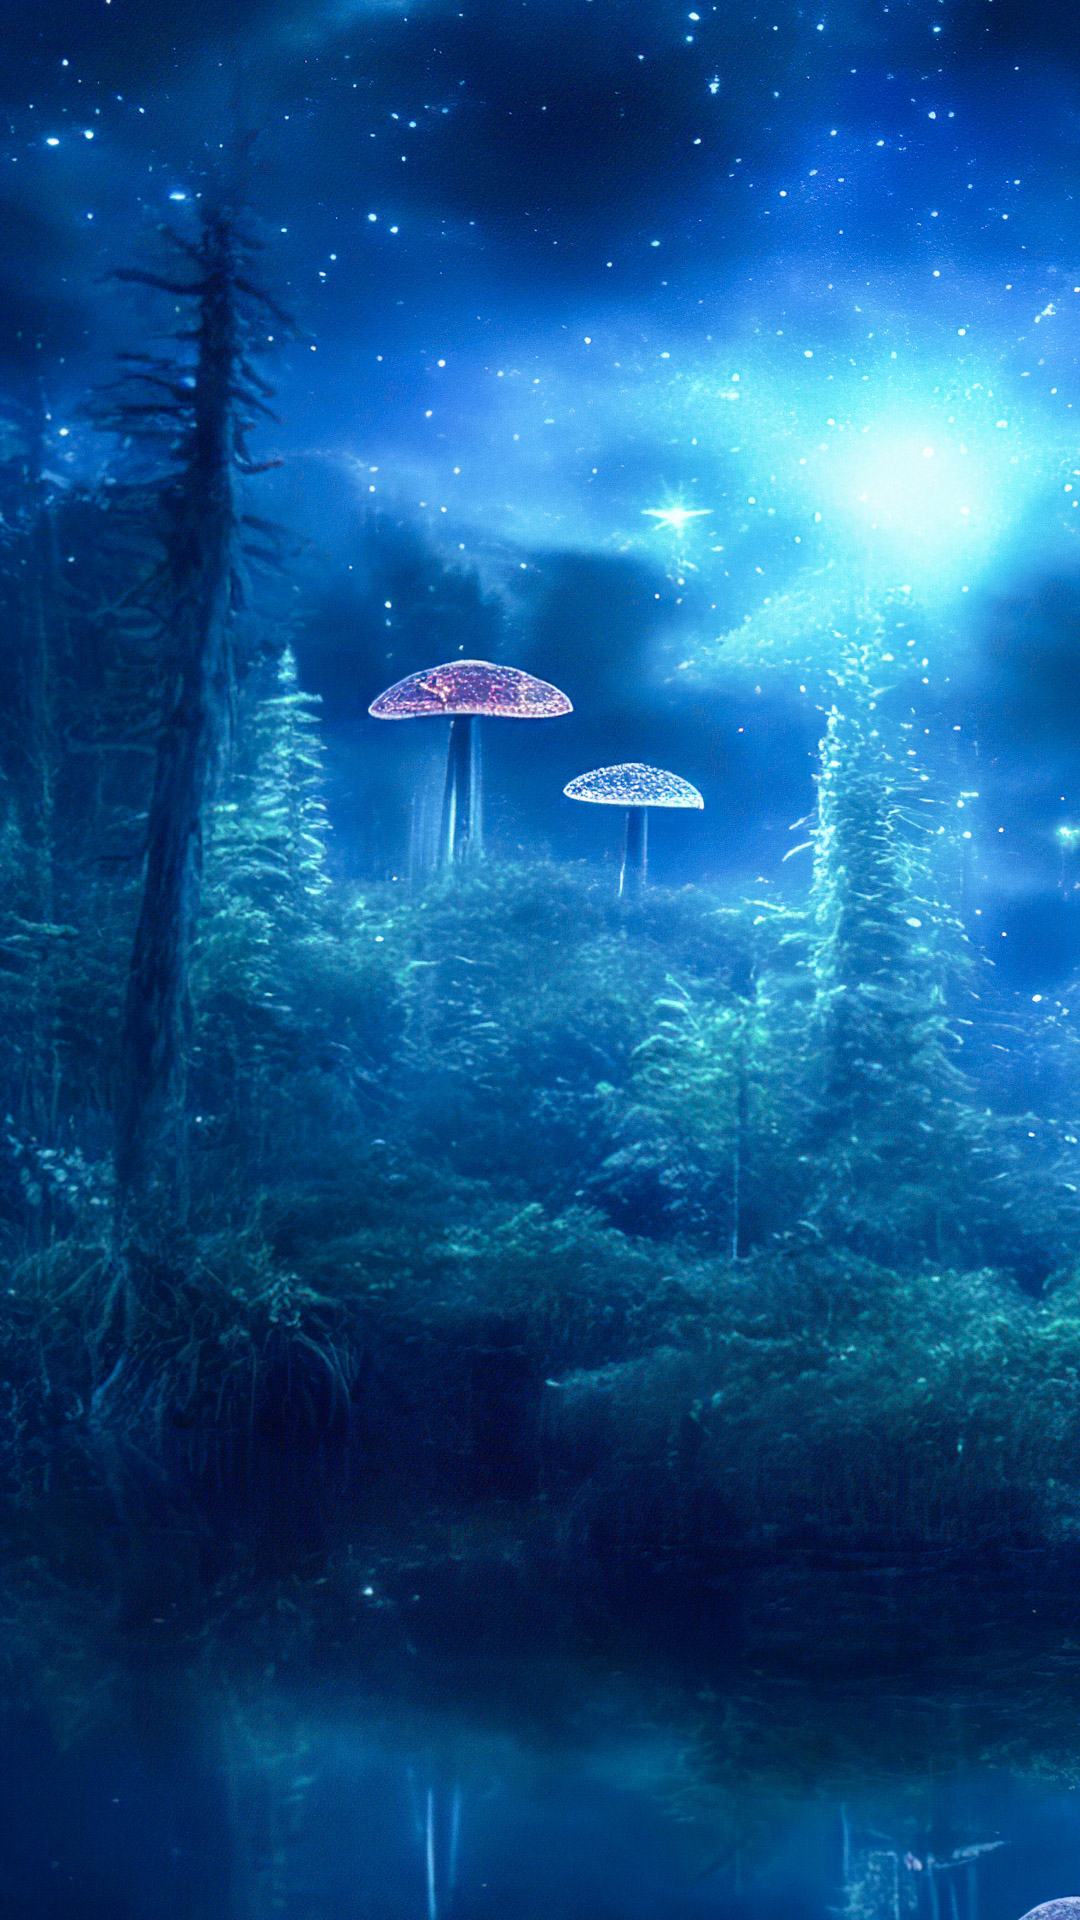 Transform your phone with HD nature wallpapers, illustrating a mystical glen with bioluminescent mushrooms, creating an enchanting, otherworldly scene.